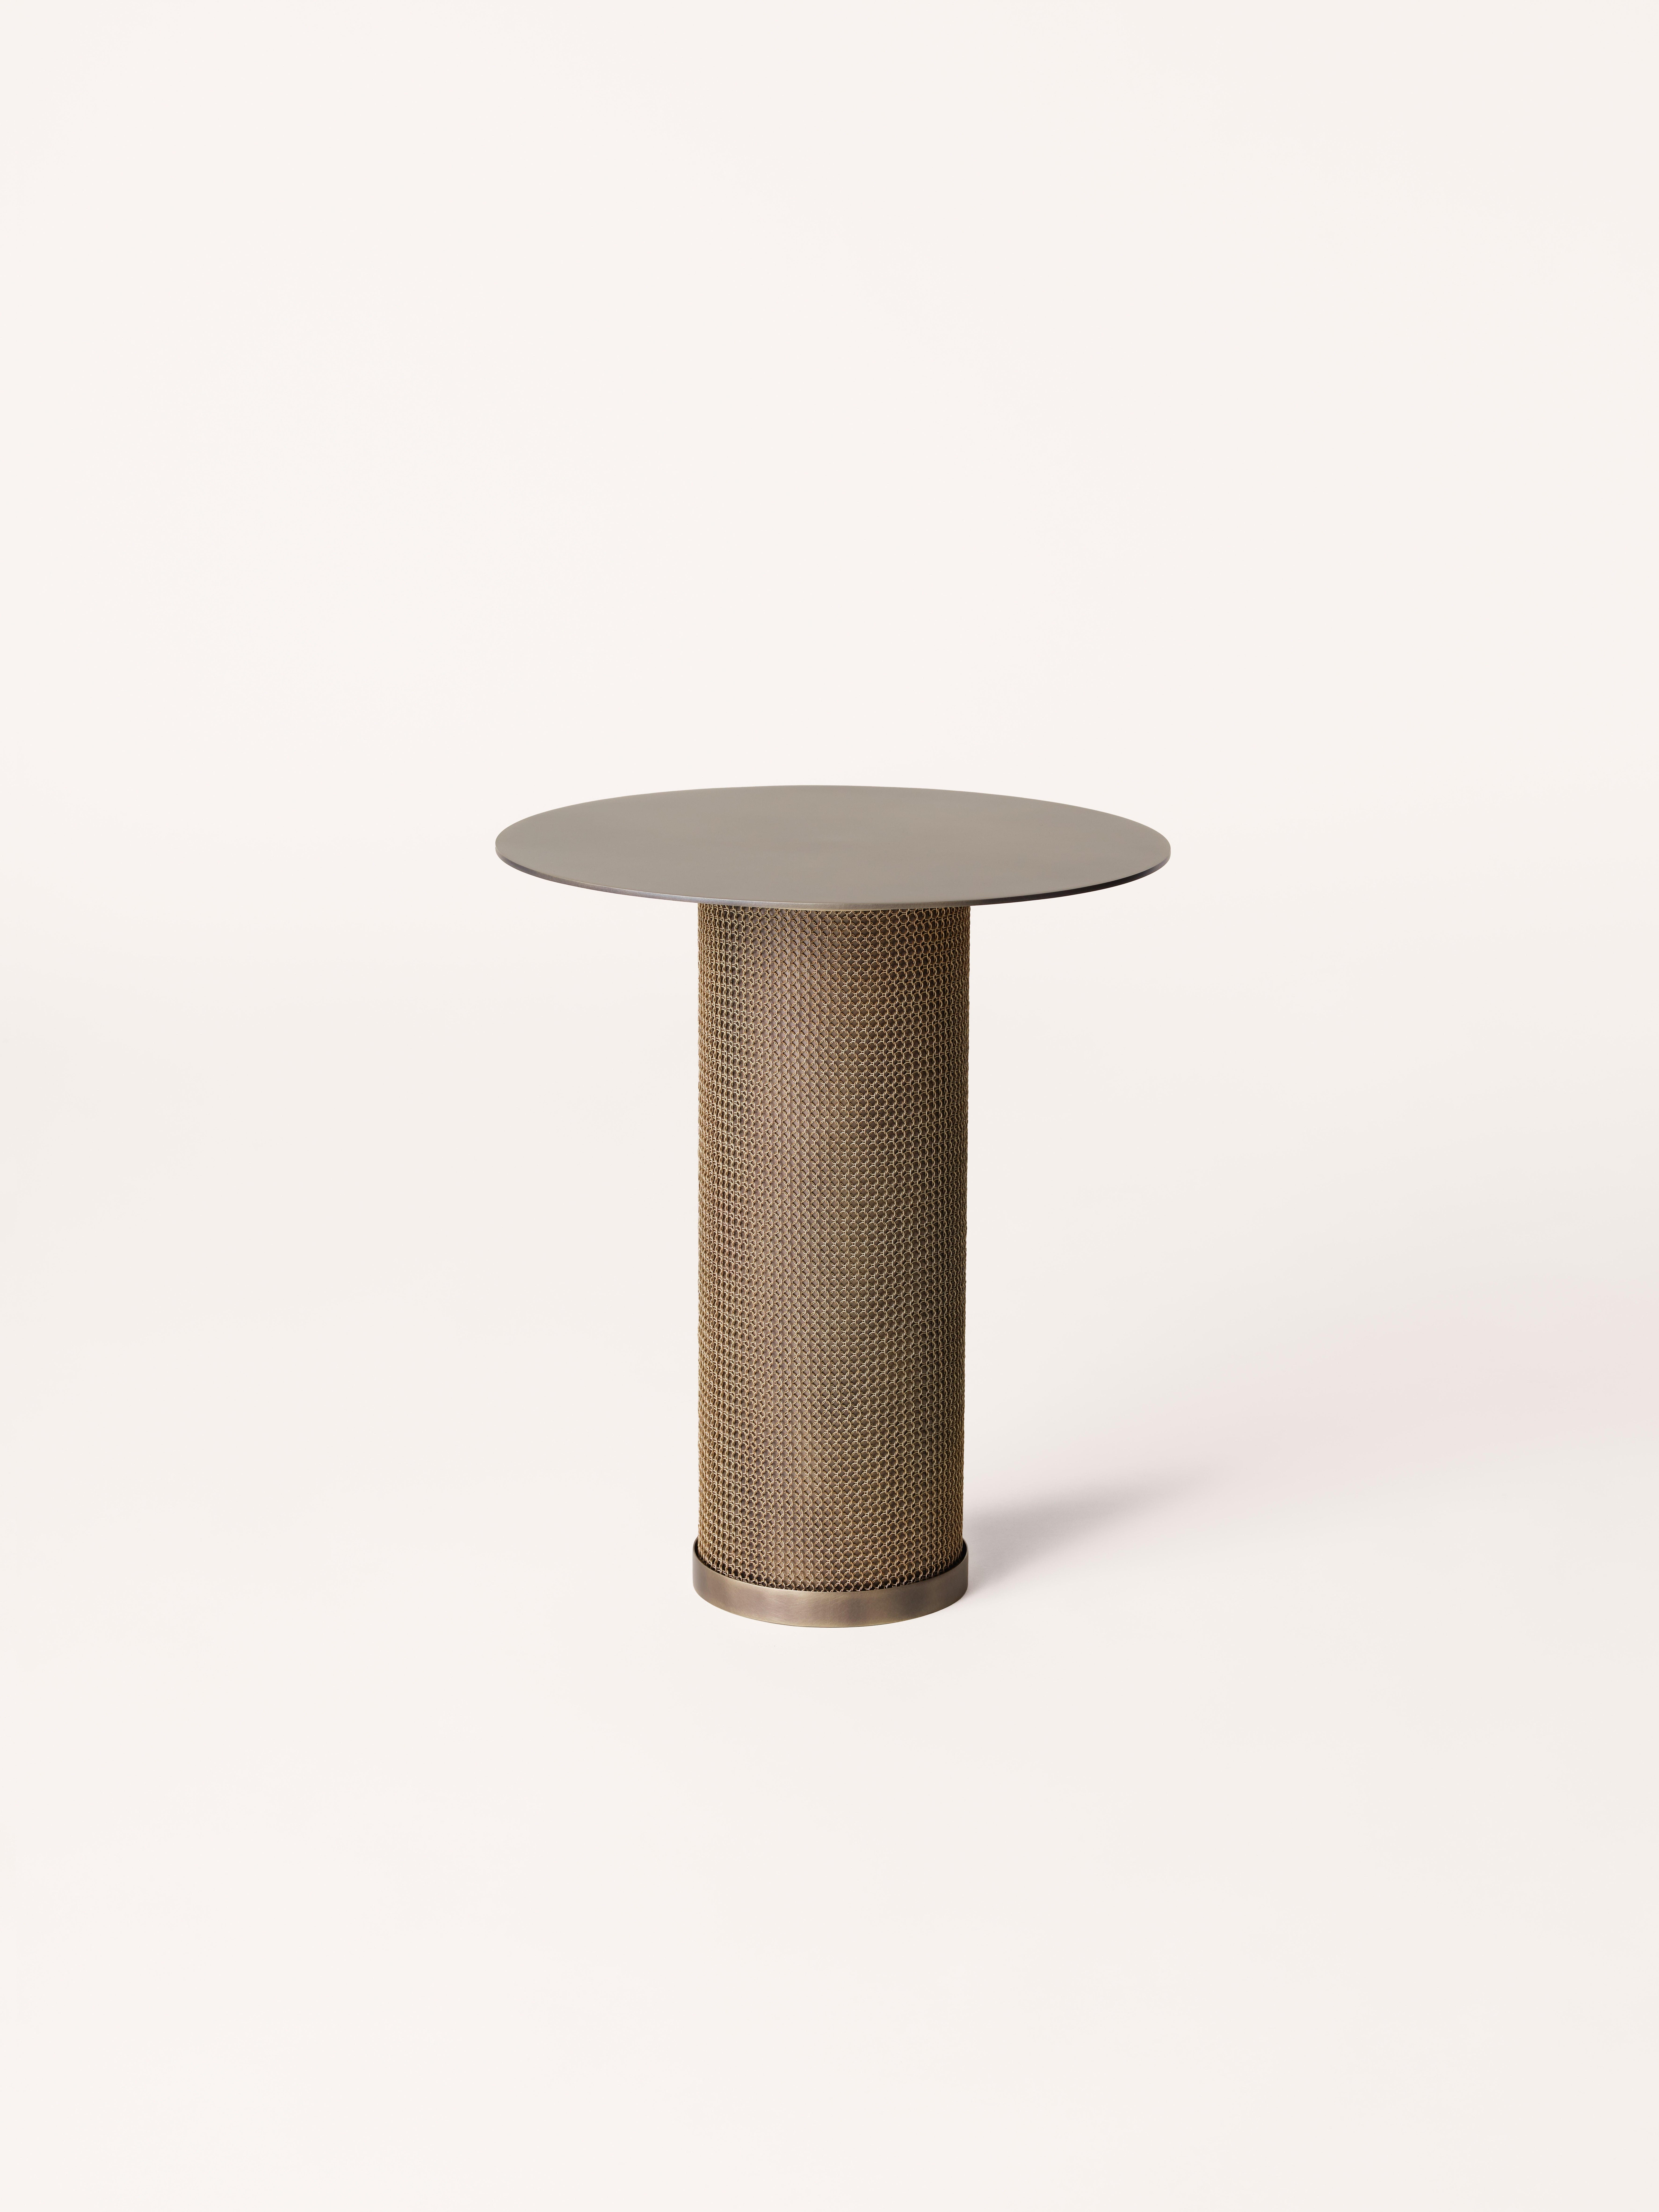 Part of the Armor Collection, the Armor side table is inspired by the intricate use of chainmail in Medieval armor. This table features a cold-rolled steel table cloaked with finished stainless steel chainmail, and is available with a triangle or